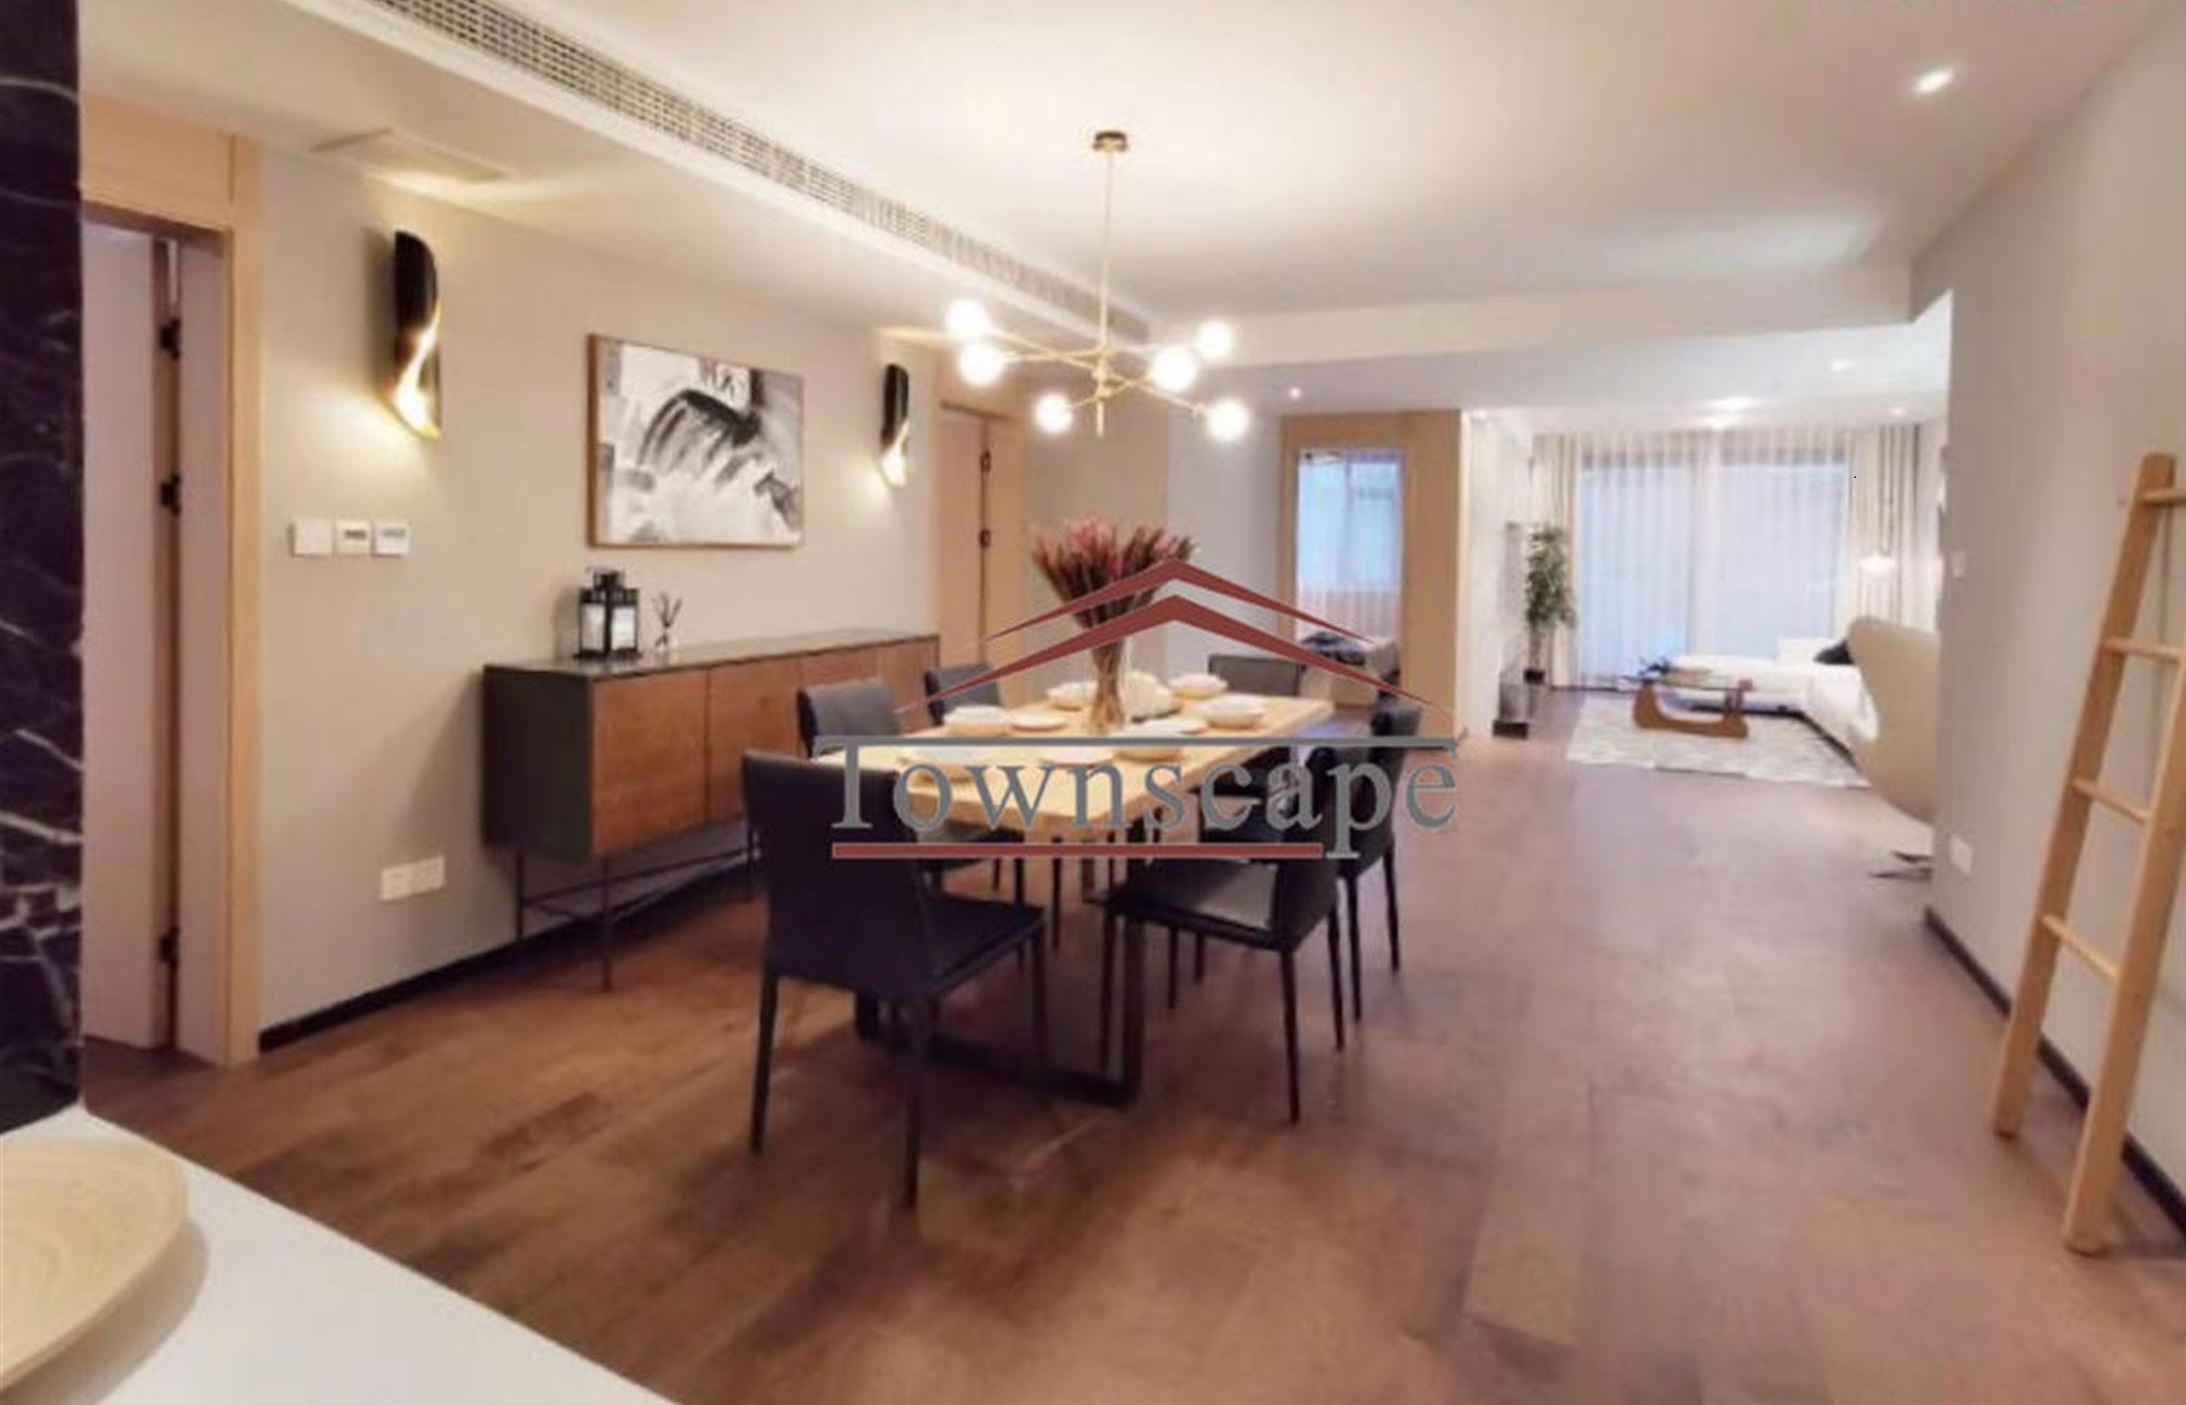 gorgeous floors New Gorgeous Spacious Modern High-Quality Apt nr SH Library for Rent